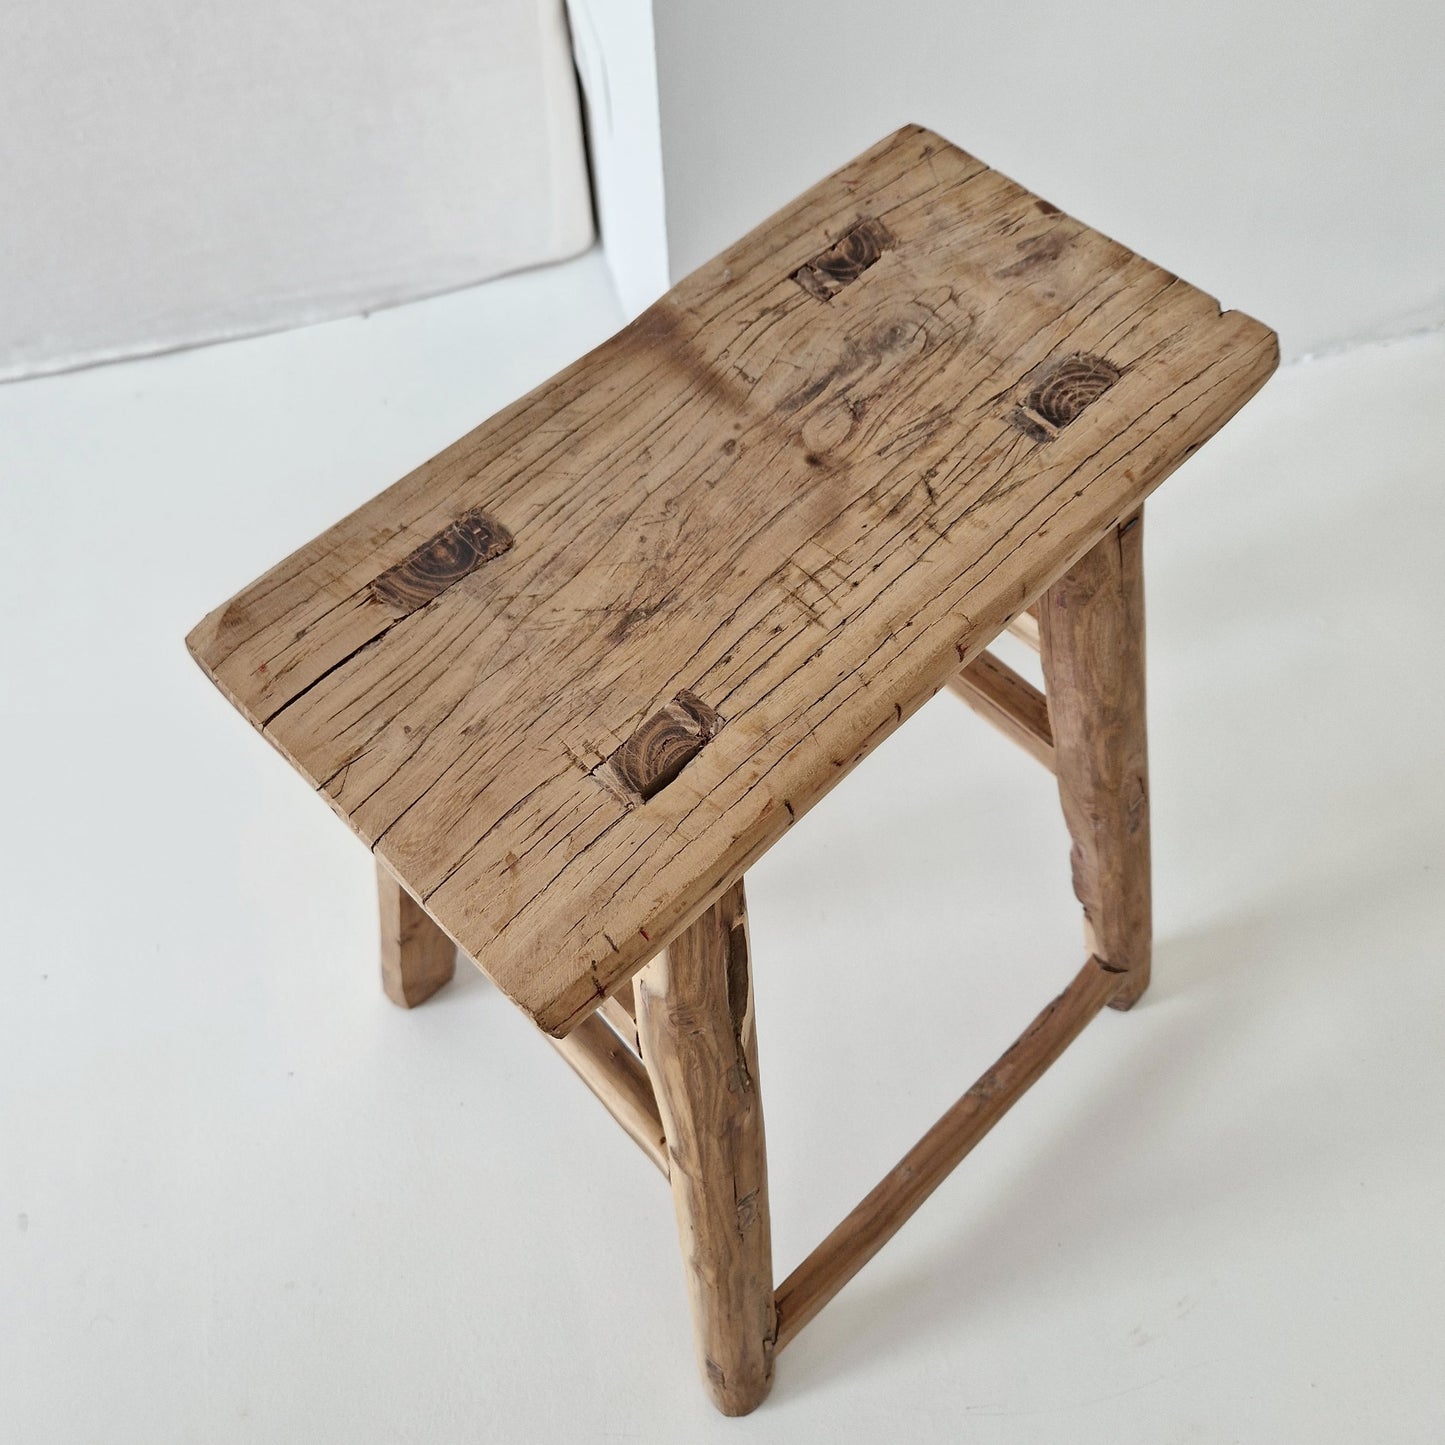 Old wooden stool 2